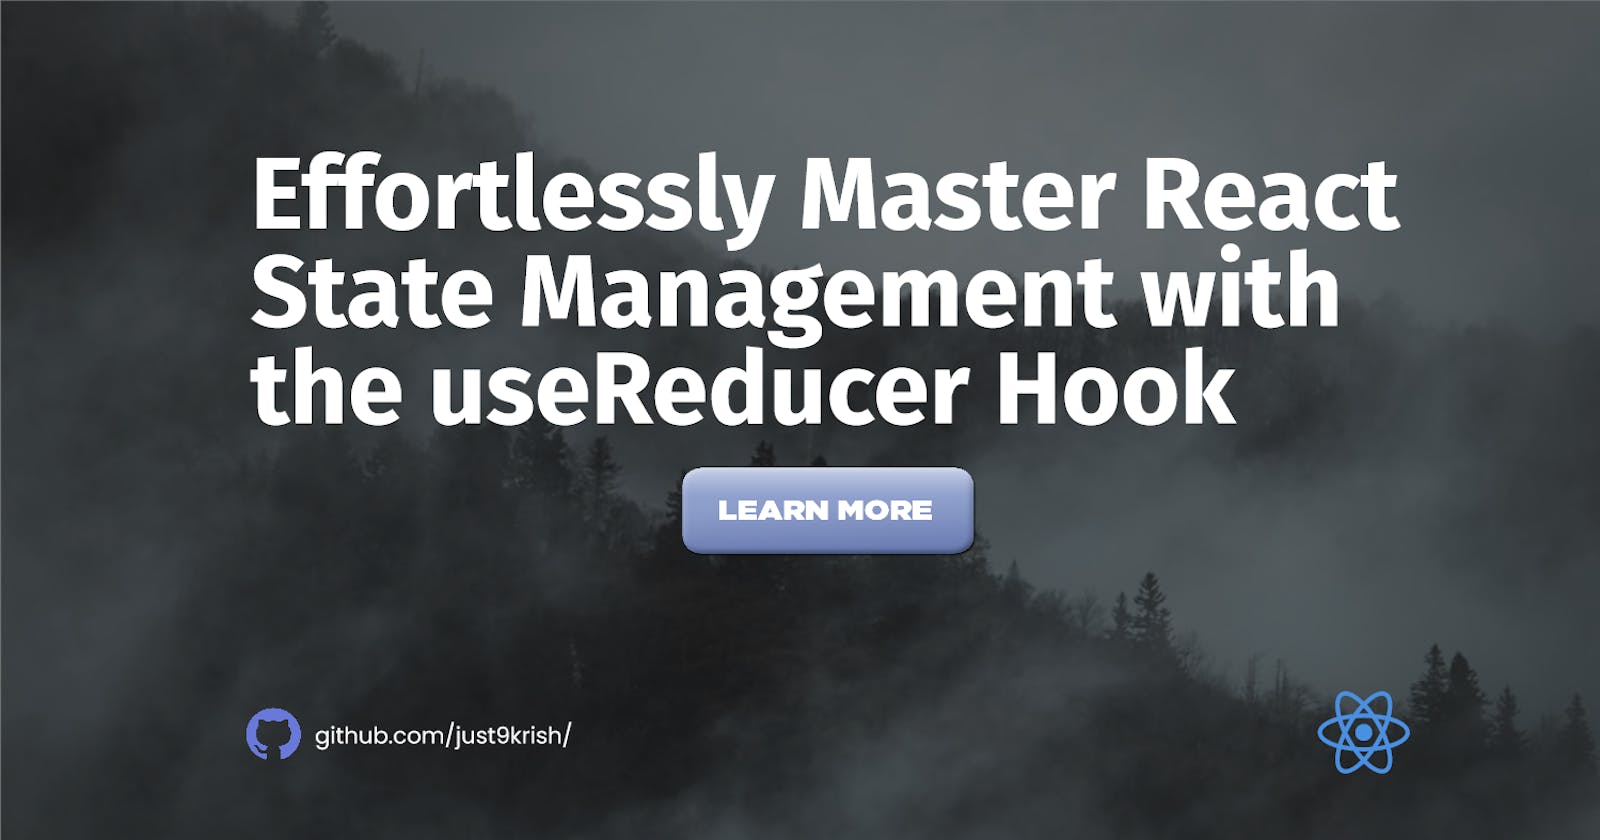 Effortlessly Master React State Management with the useReducer Hook